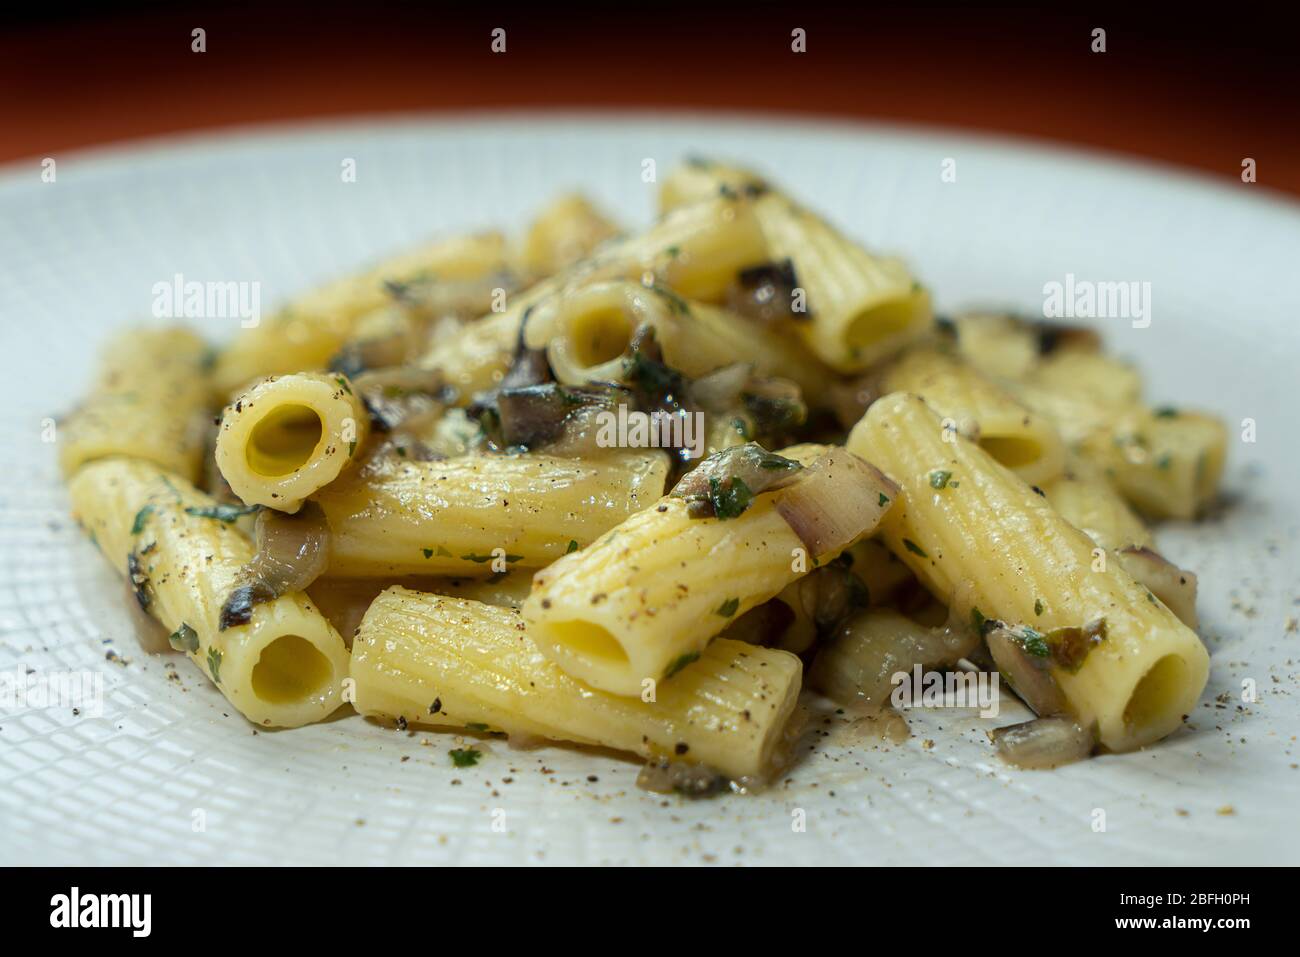 A dish of rigatoni with late red radicchio sauce Stock Photo